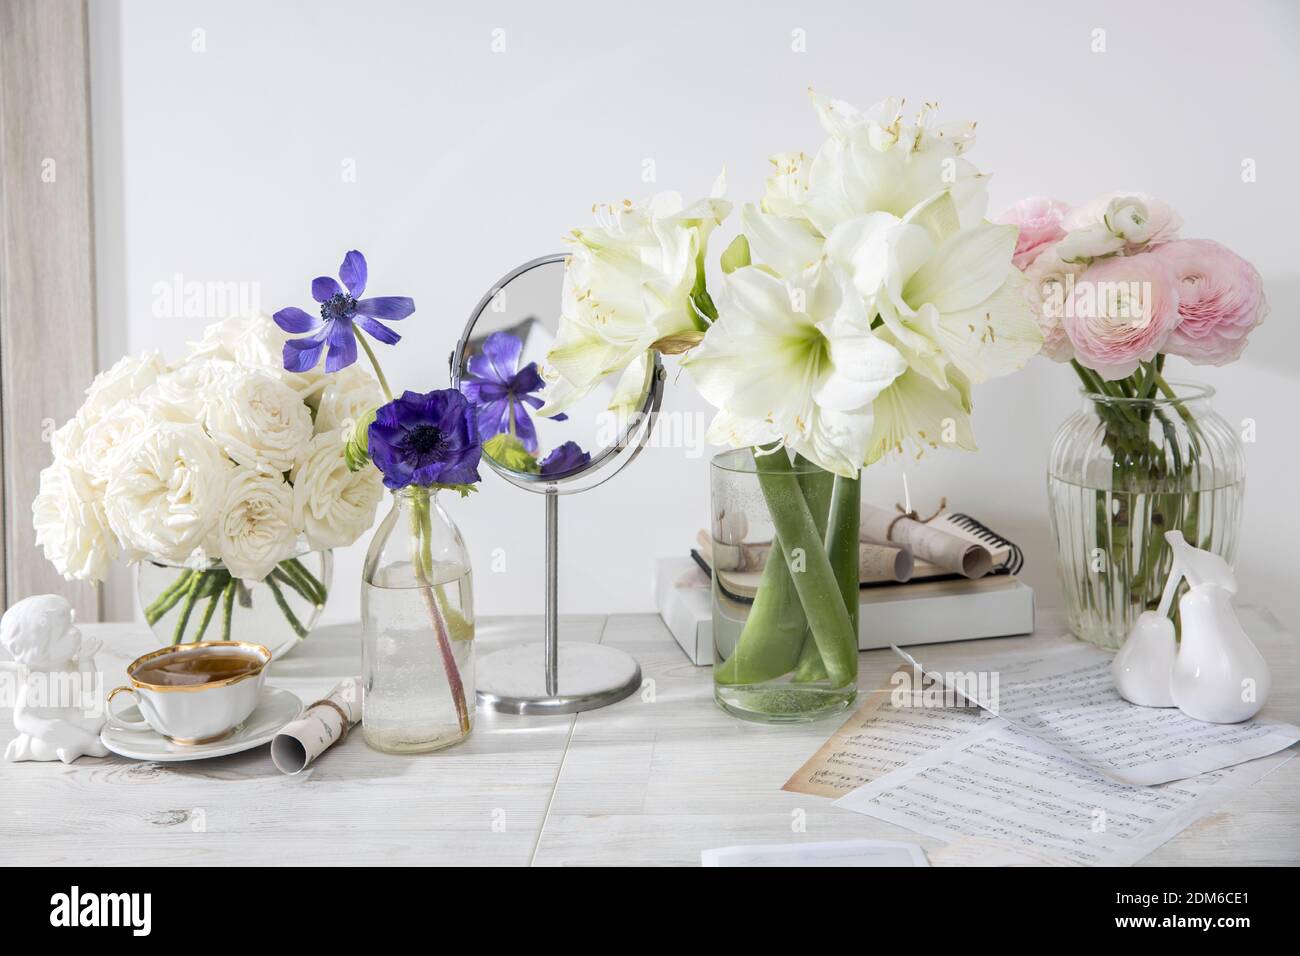 A bouquet of white roses in a round glass vase, a bouquet of white amaryllis, a cup of tea, a figurine on the table. Decoration of the kitchen. Rose P Stock Photo